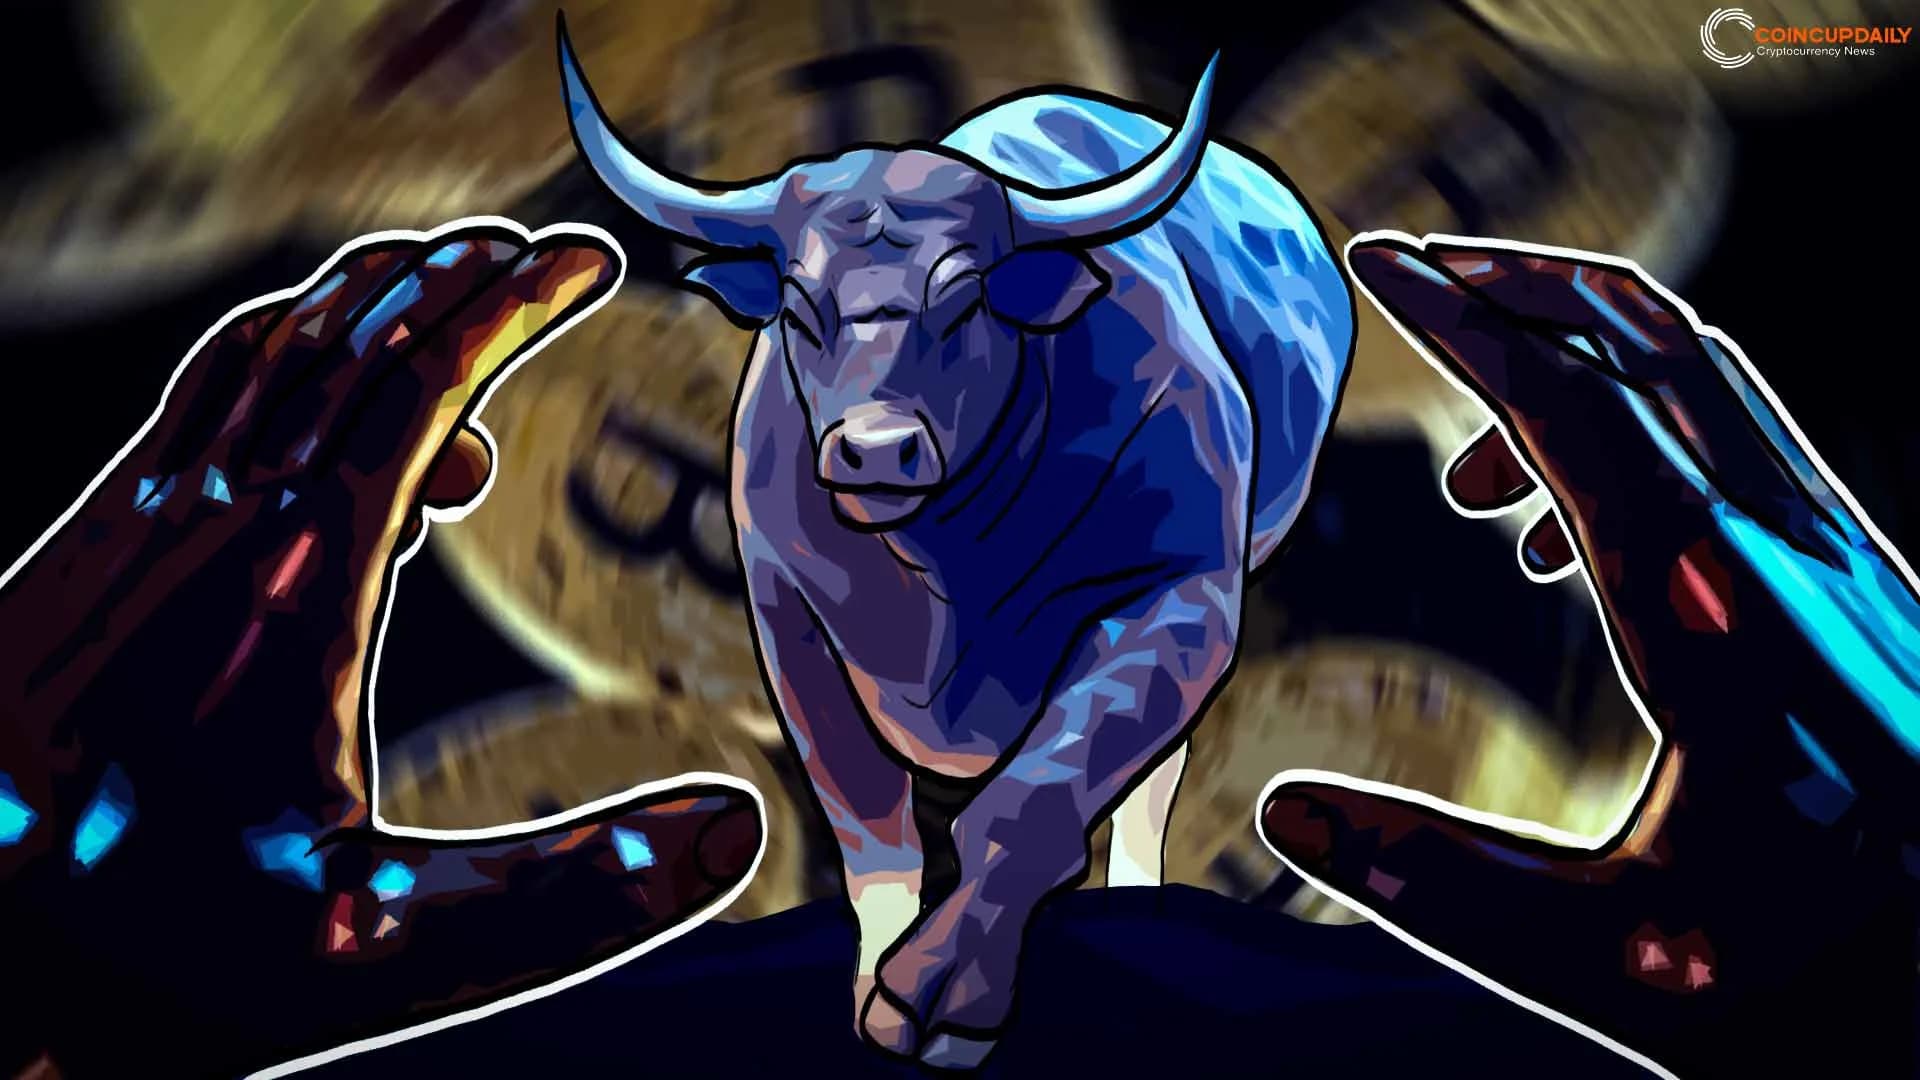 Market Resurgence: The 4 Factors Fueling Bitcoin’s Recent Price Rally